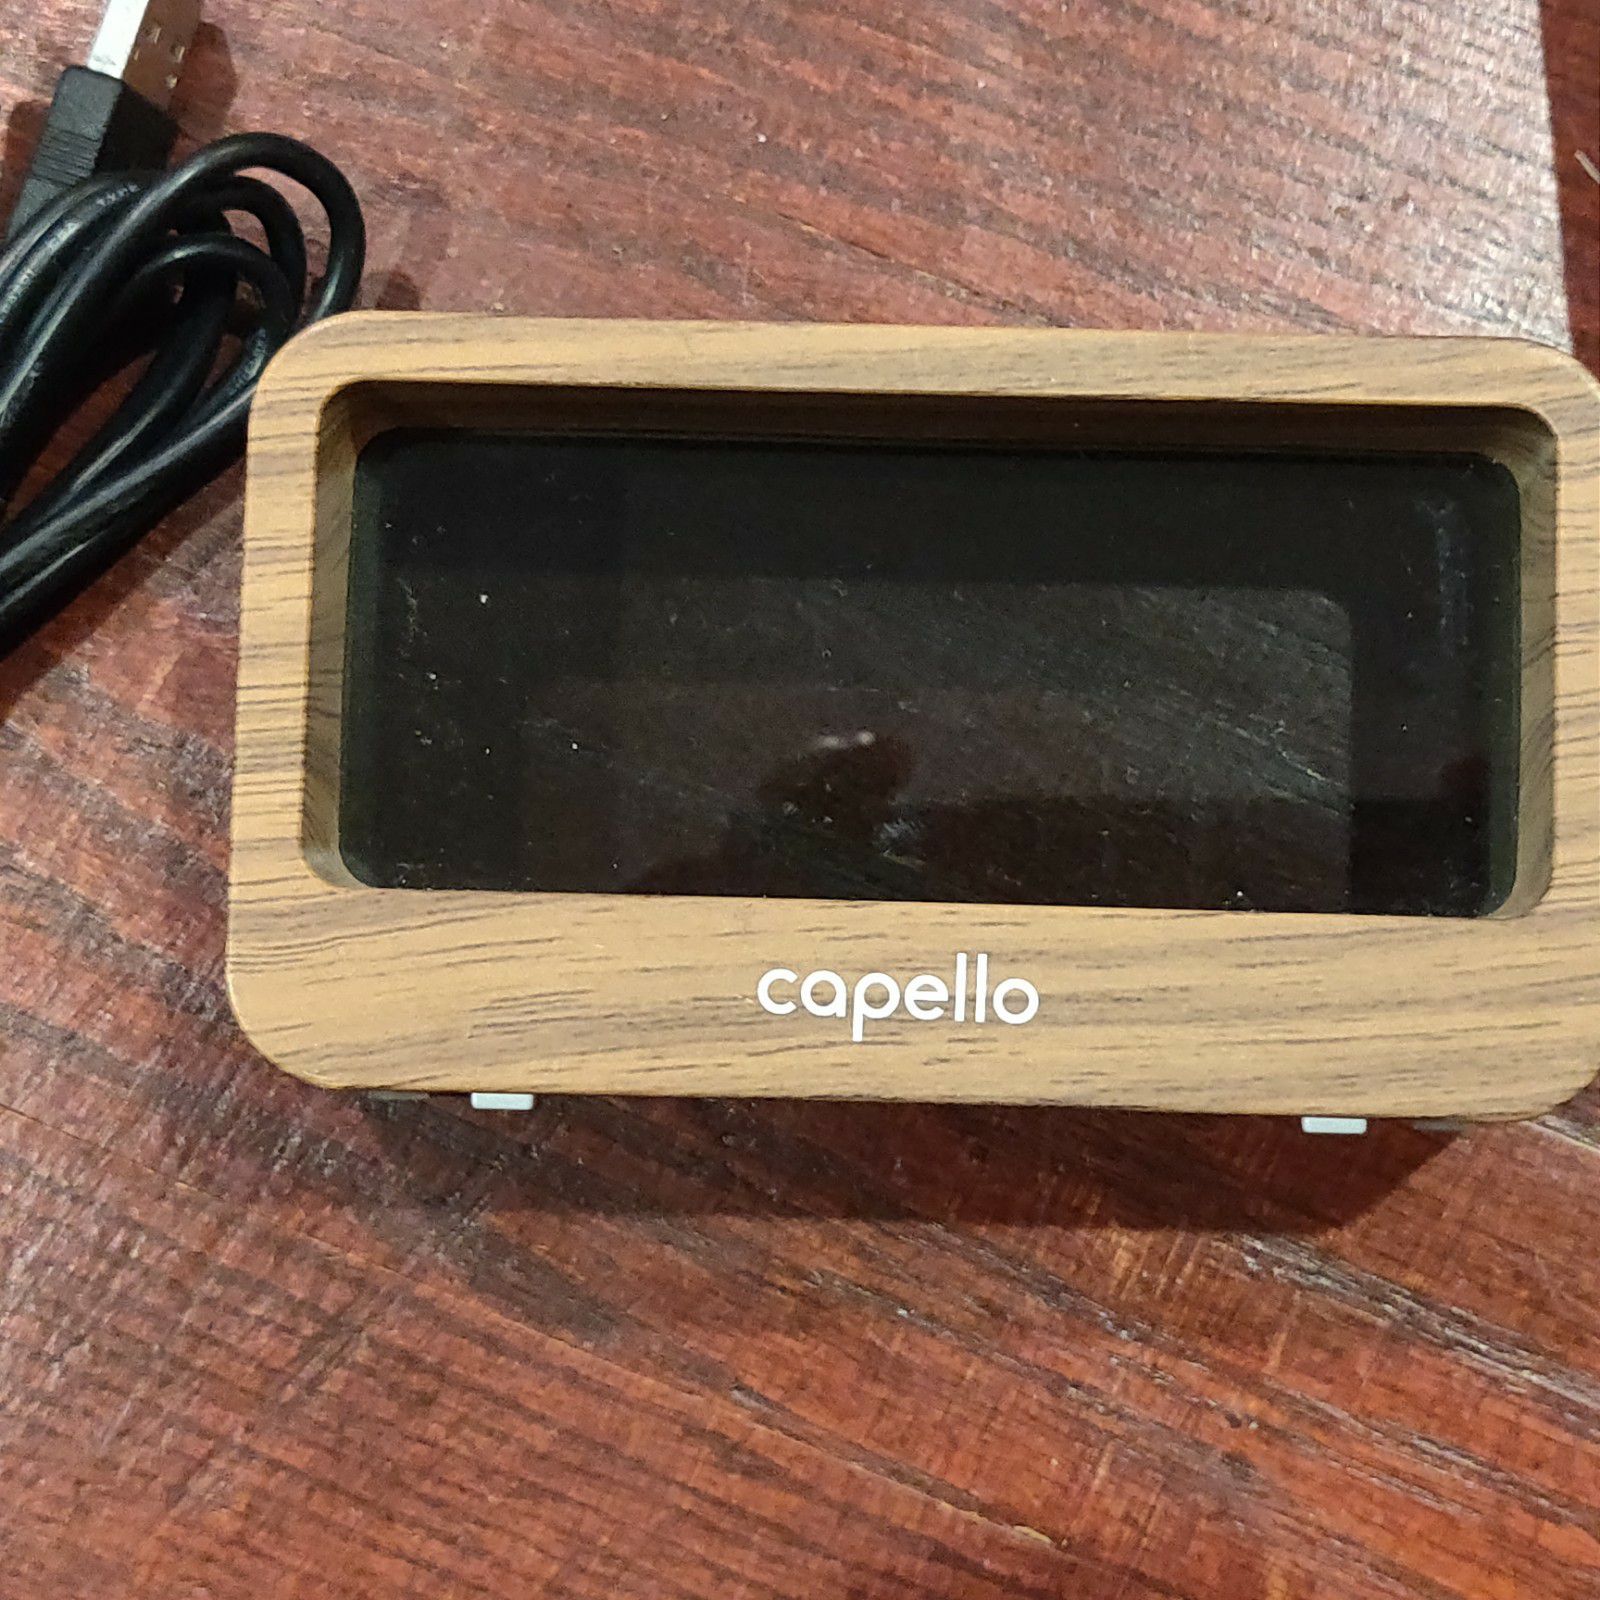 Capello digital alarm clock and phone charger